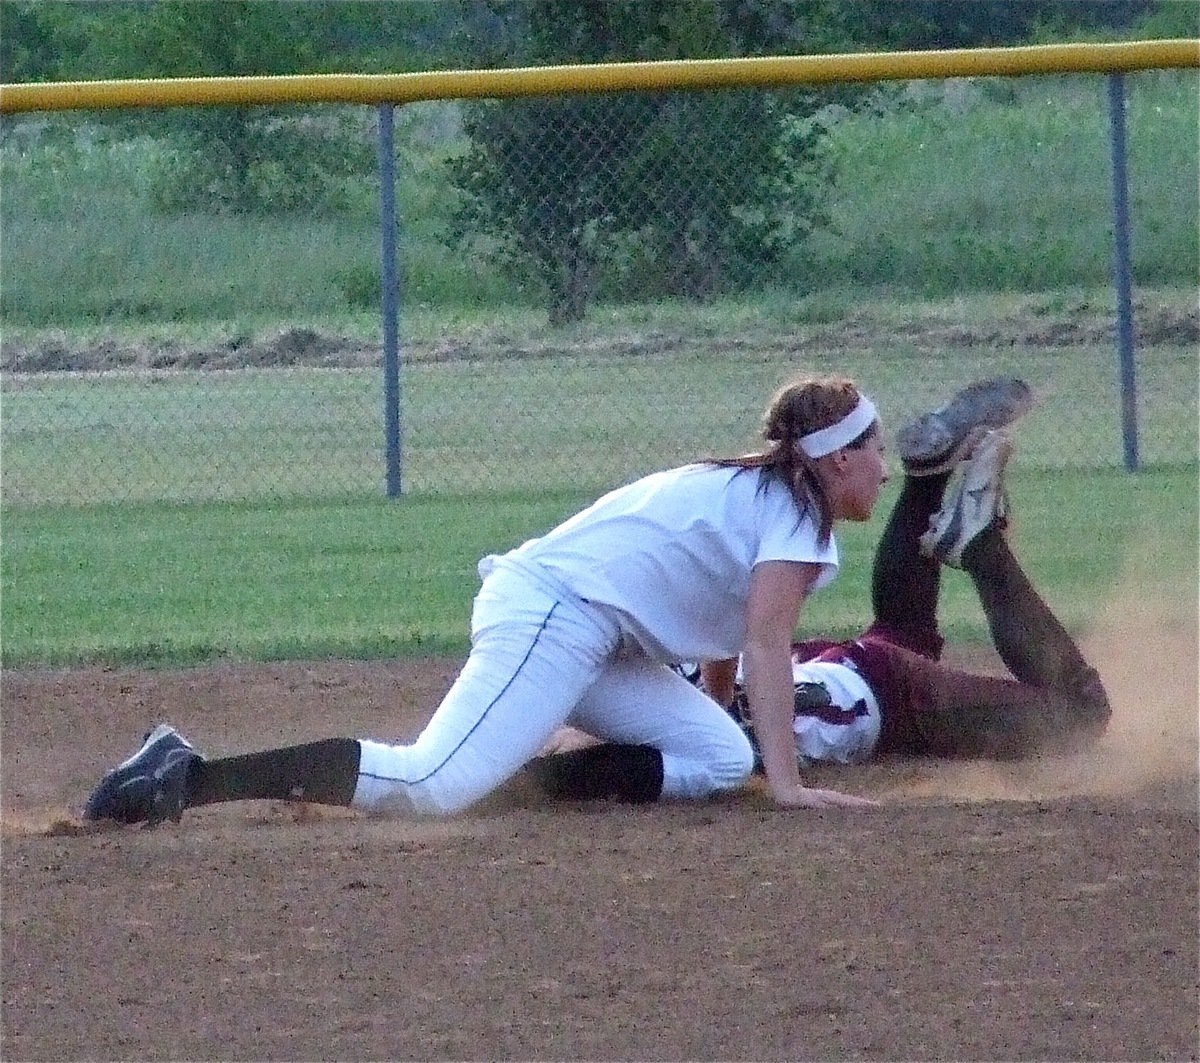 Image: Bailey Bumpus, also a senior Lady Gladiator, tries to make a tag for an out at second base.